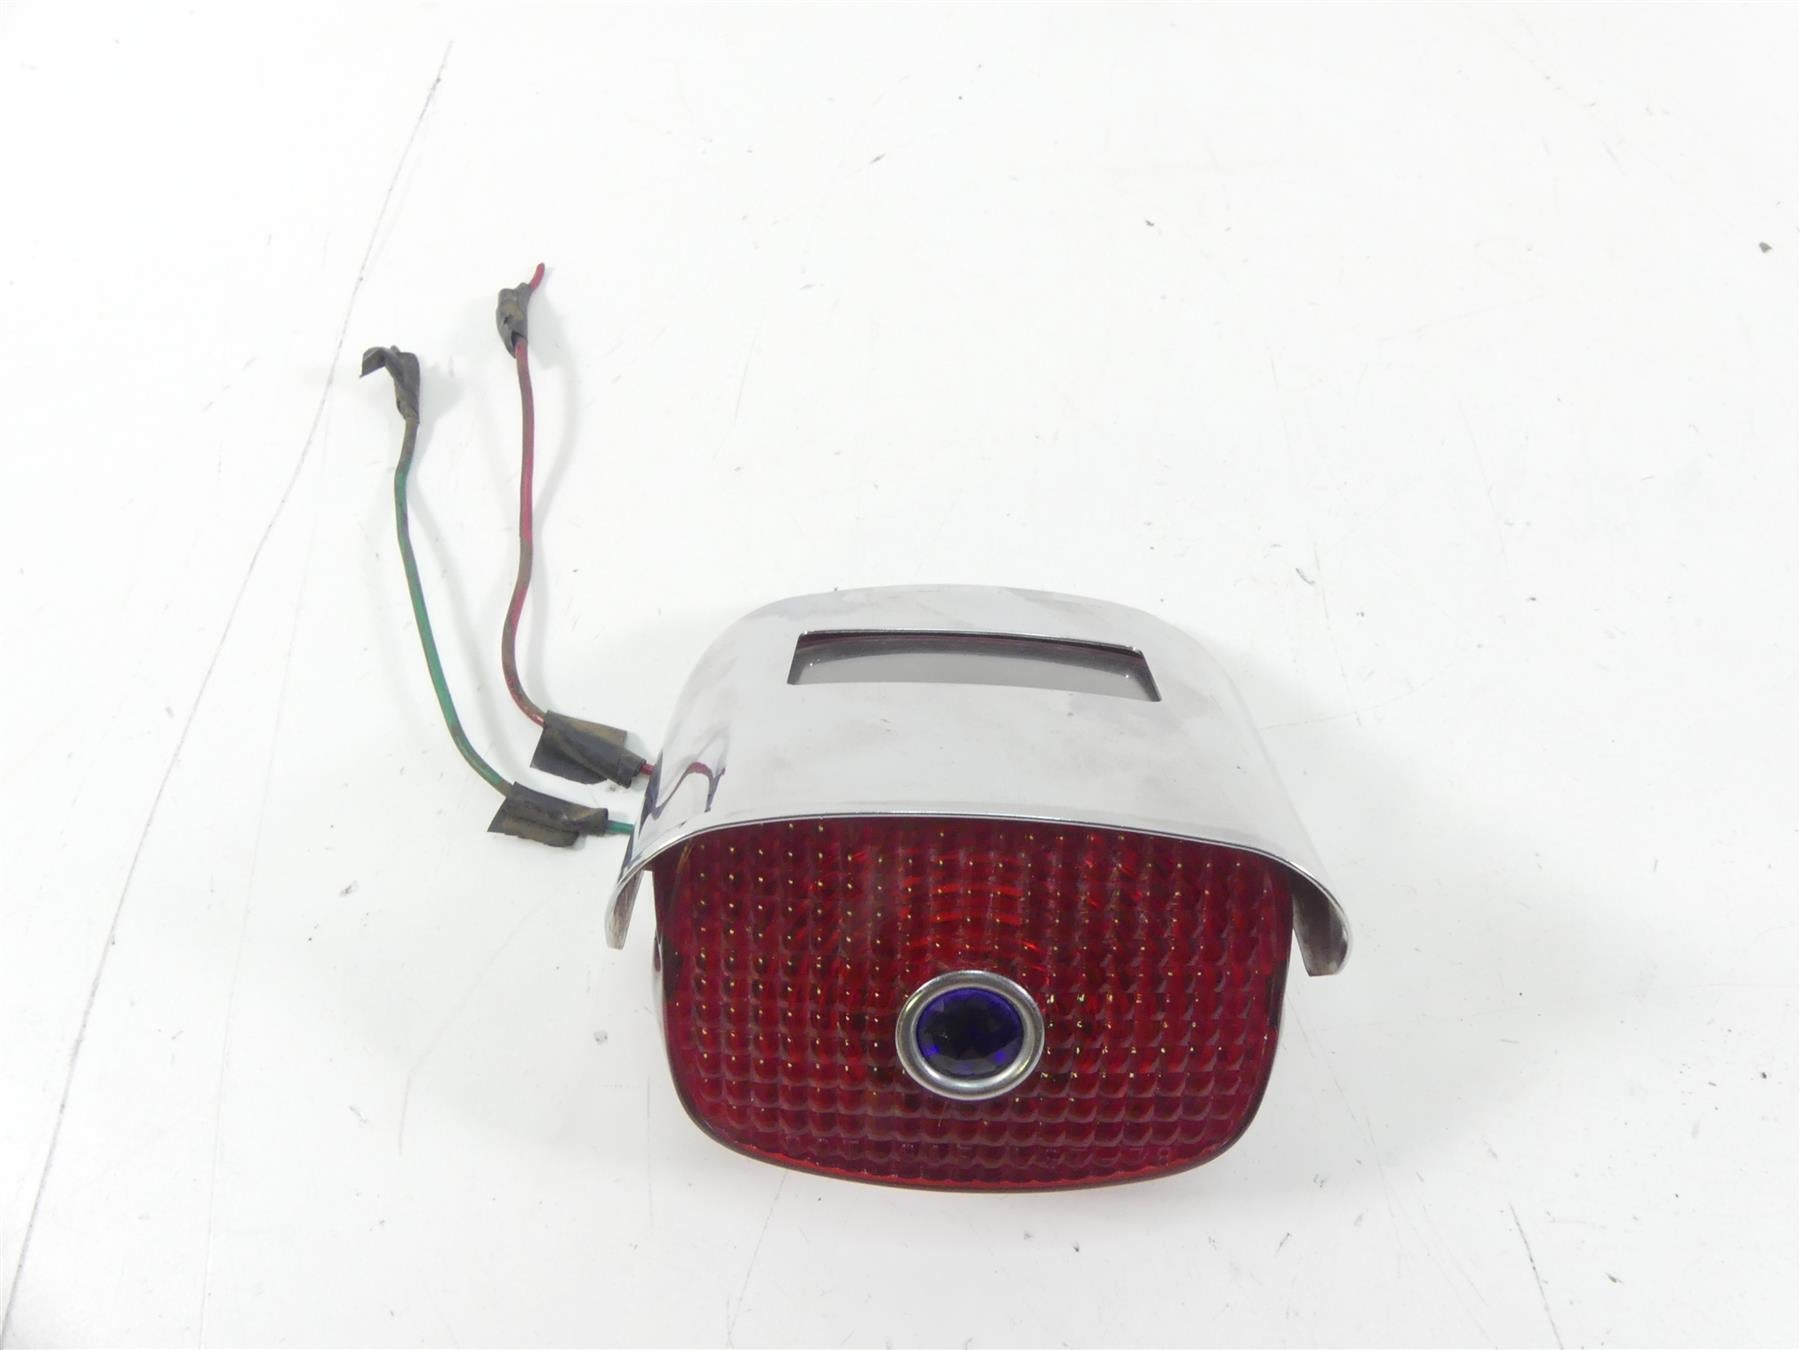 1989 Harley Touring FLTC Tour Glide Chris Products Taillight Tail Light  LHD1B | Mototech271